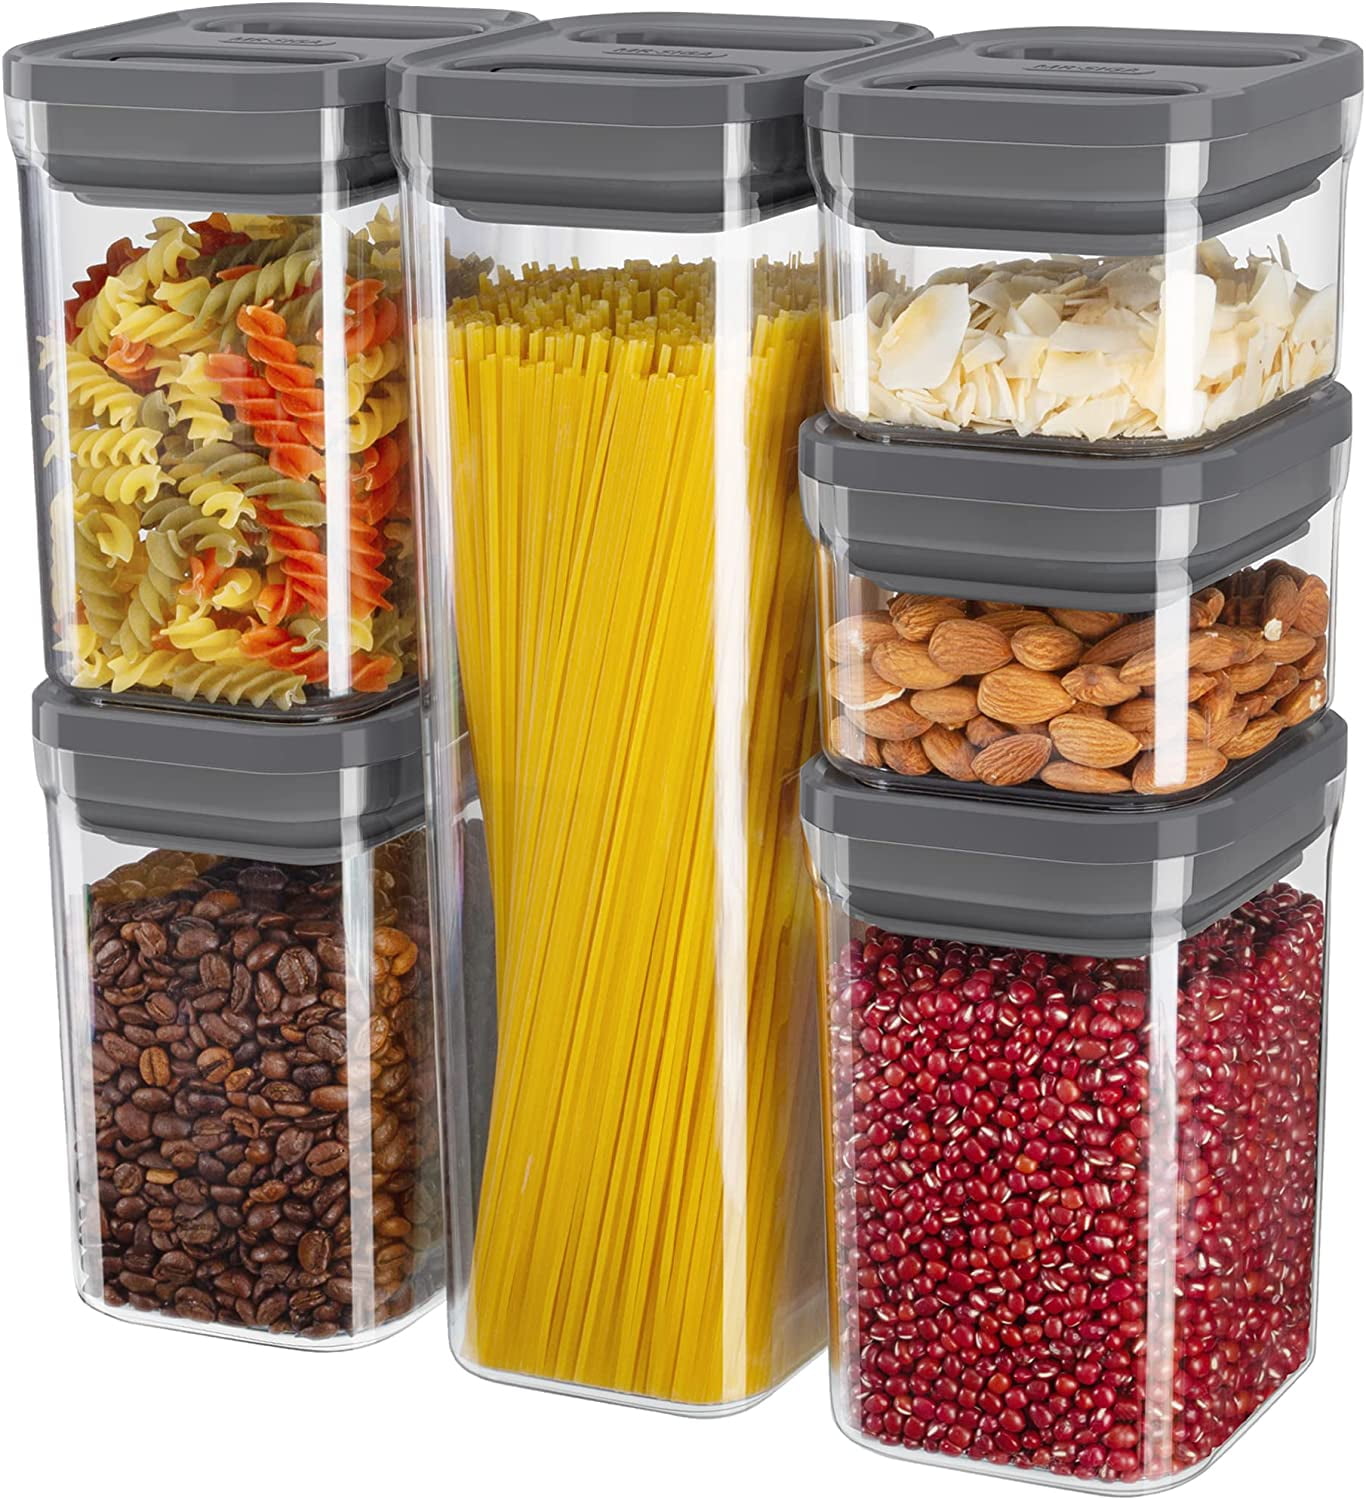 Wholesale Mr. Handy Lock & Snap Food Container- 600ml